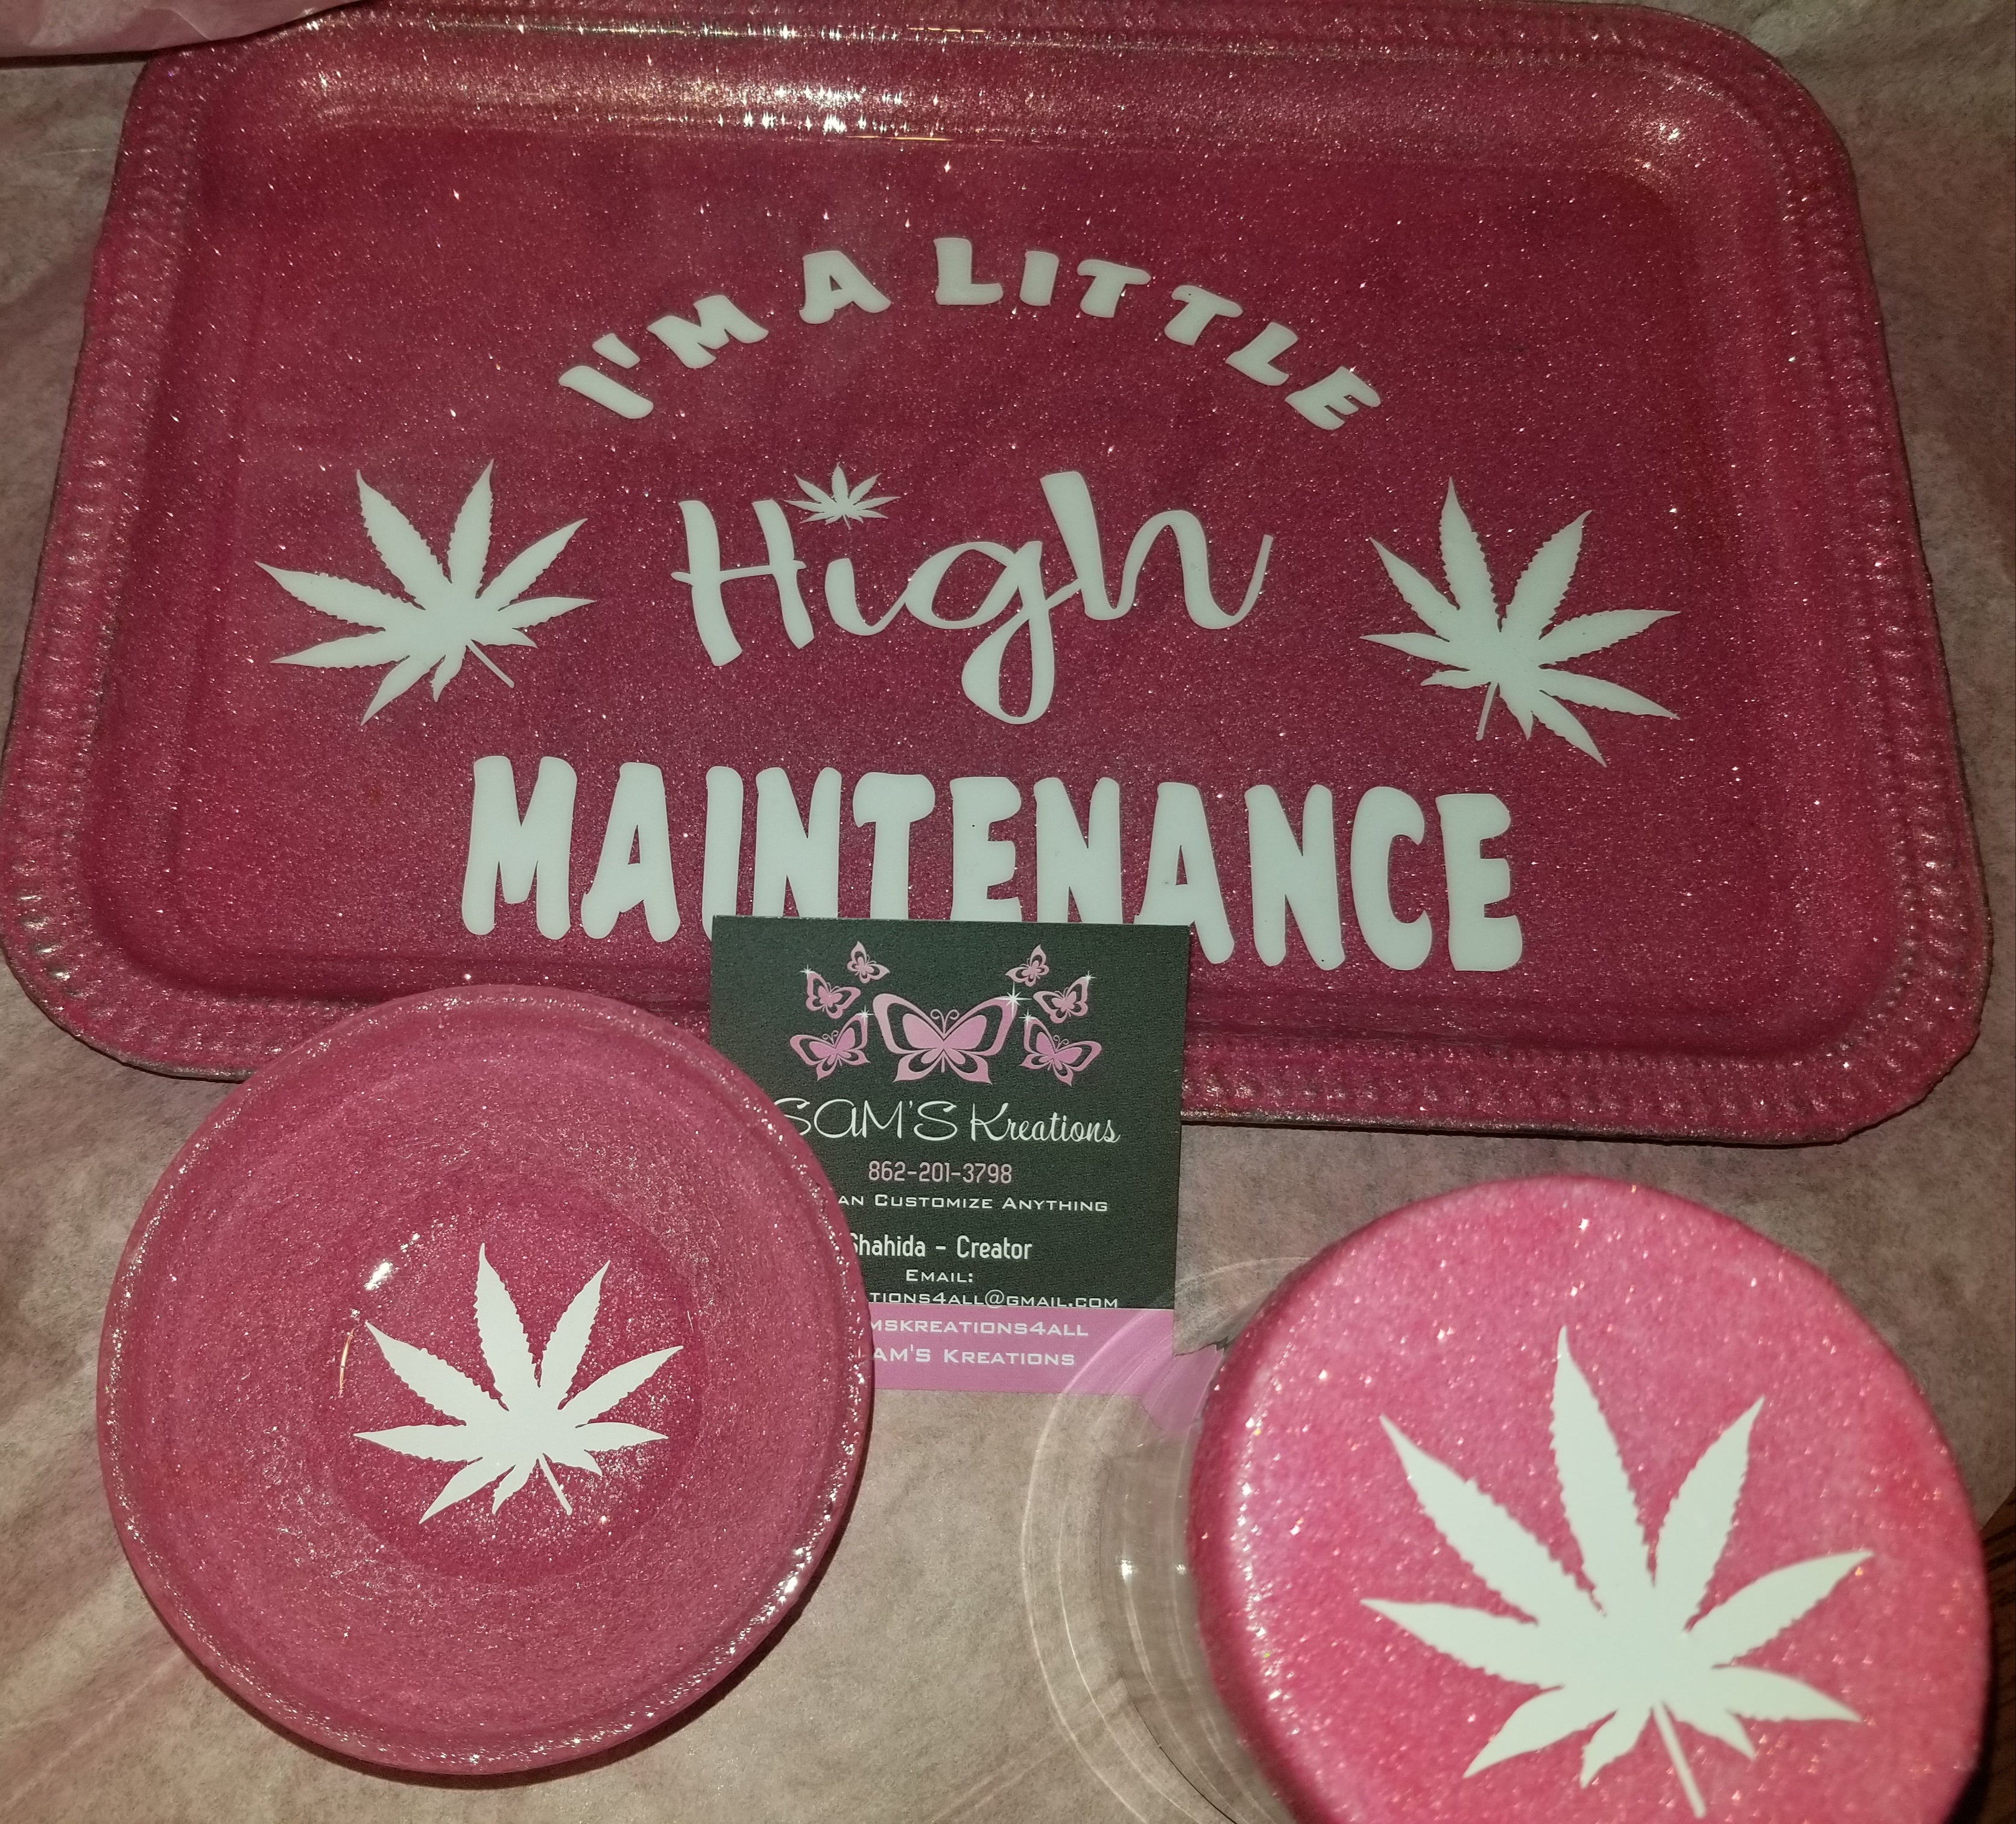 Other, Custom Gold Glitter Rolling Tray Set